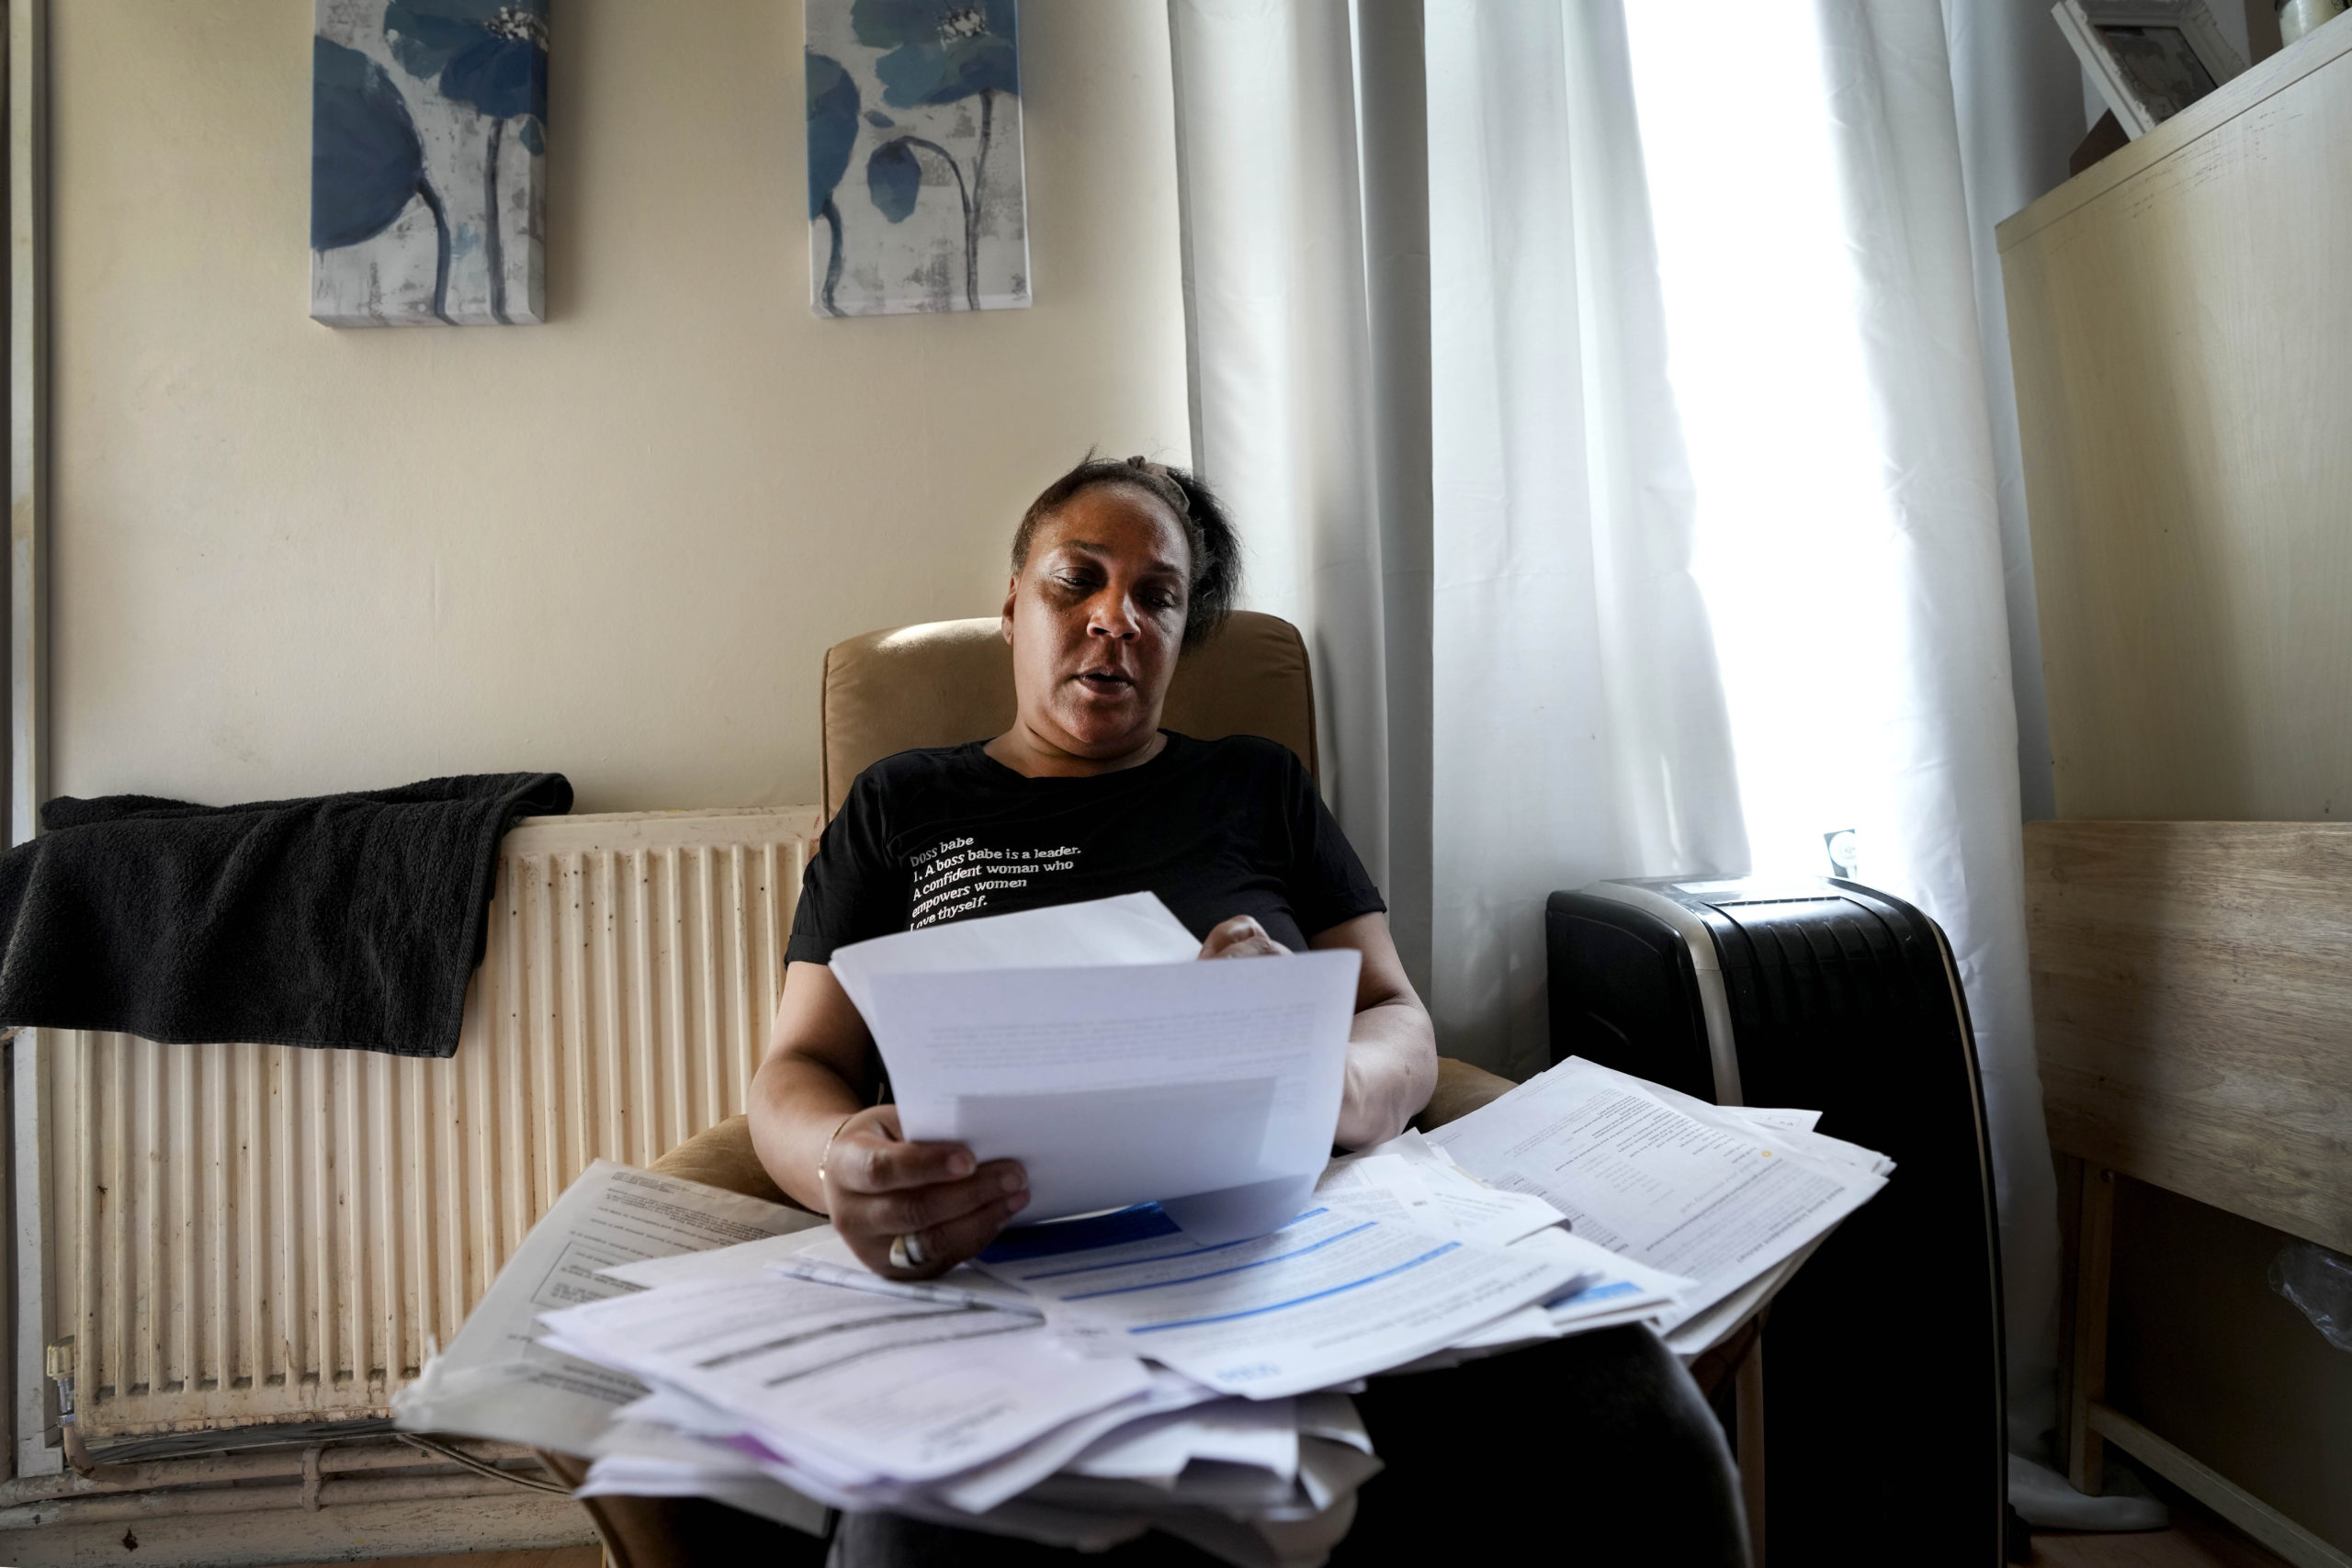 Jennifer Jones sorts her bills at her small flat in London on Thursday. Like millions of people, Jones, 54, is struggling to cope as energy and food prices skyrocket in Great Britain.